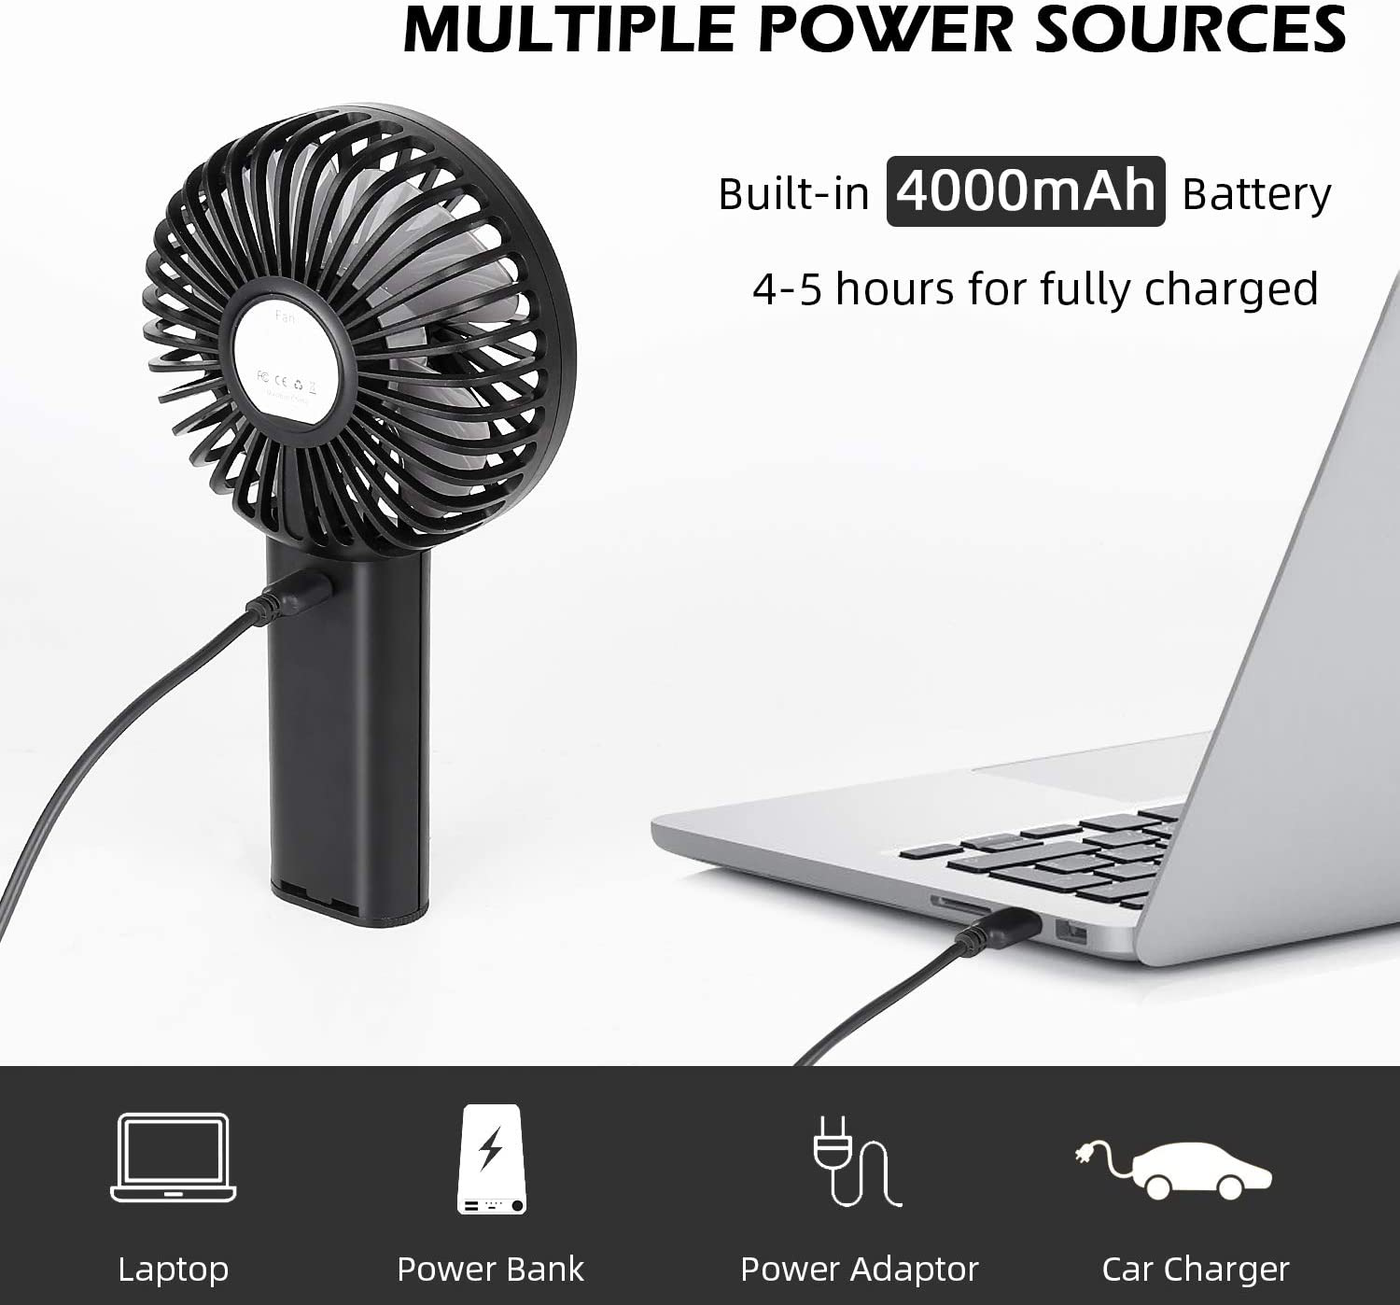 Portable Handheld Fan, 4000mAh Rechargeable Battery/ USB Operated Mini Cooling Fan for Home Office Outdoors Travel…